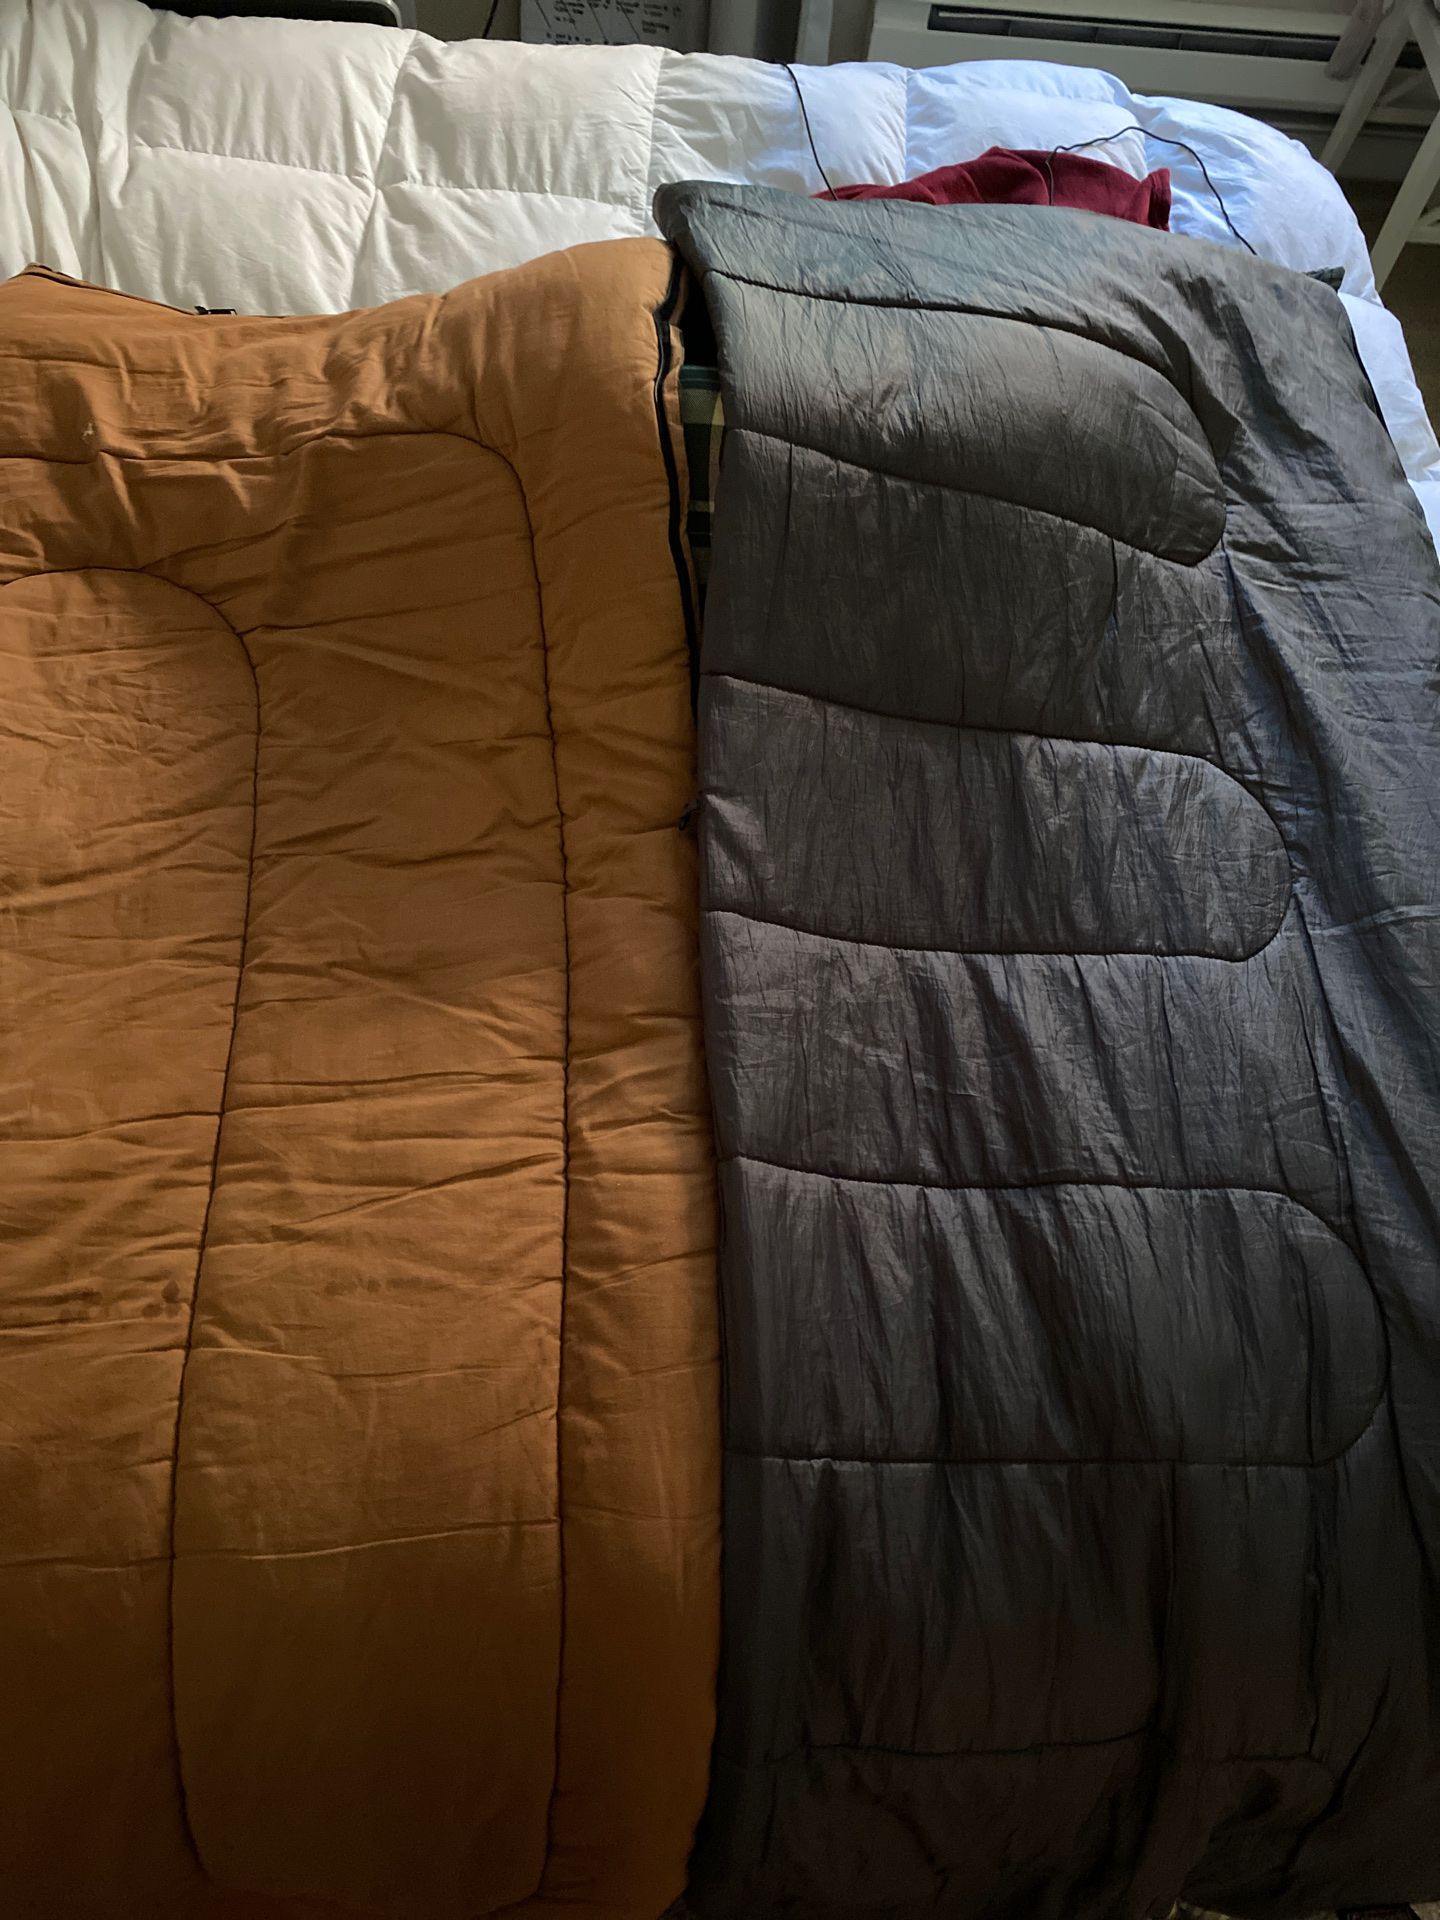 2 zip-up sleeping bags for adults